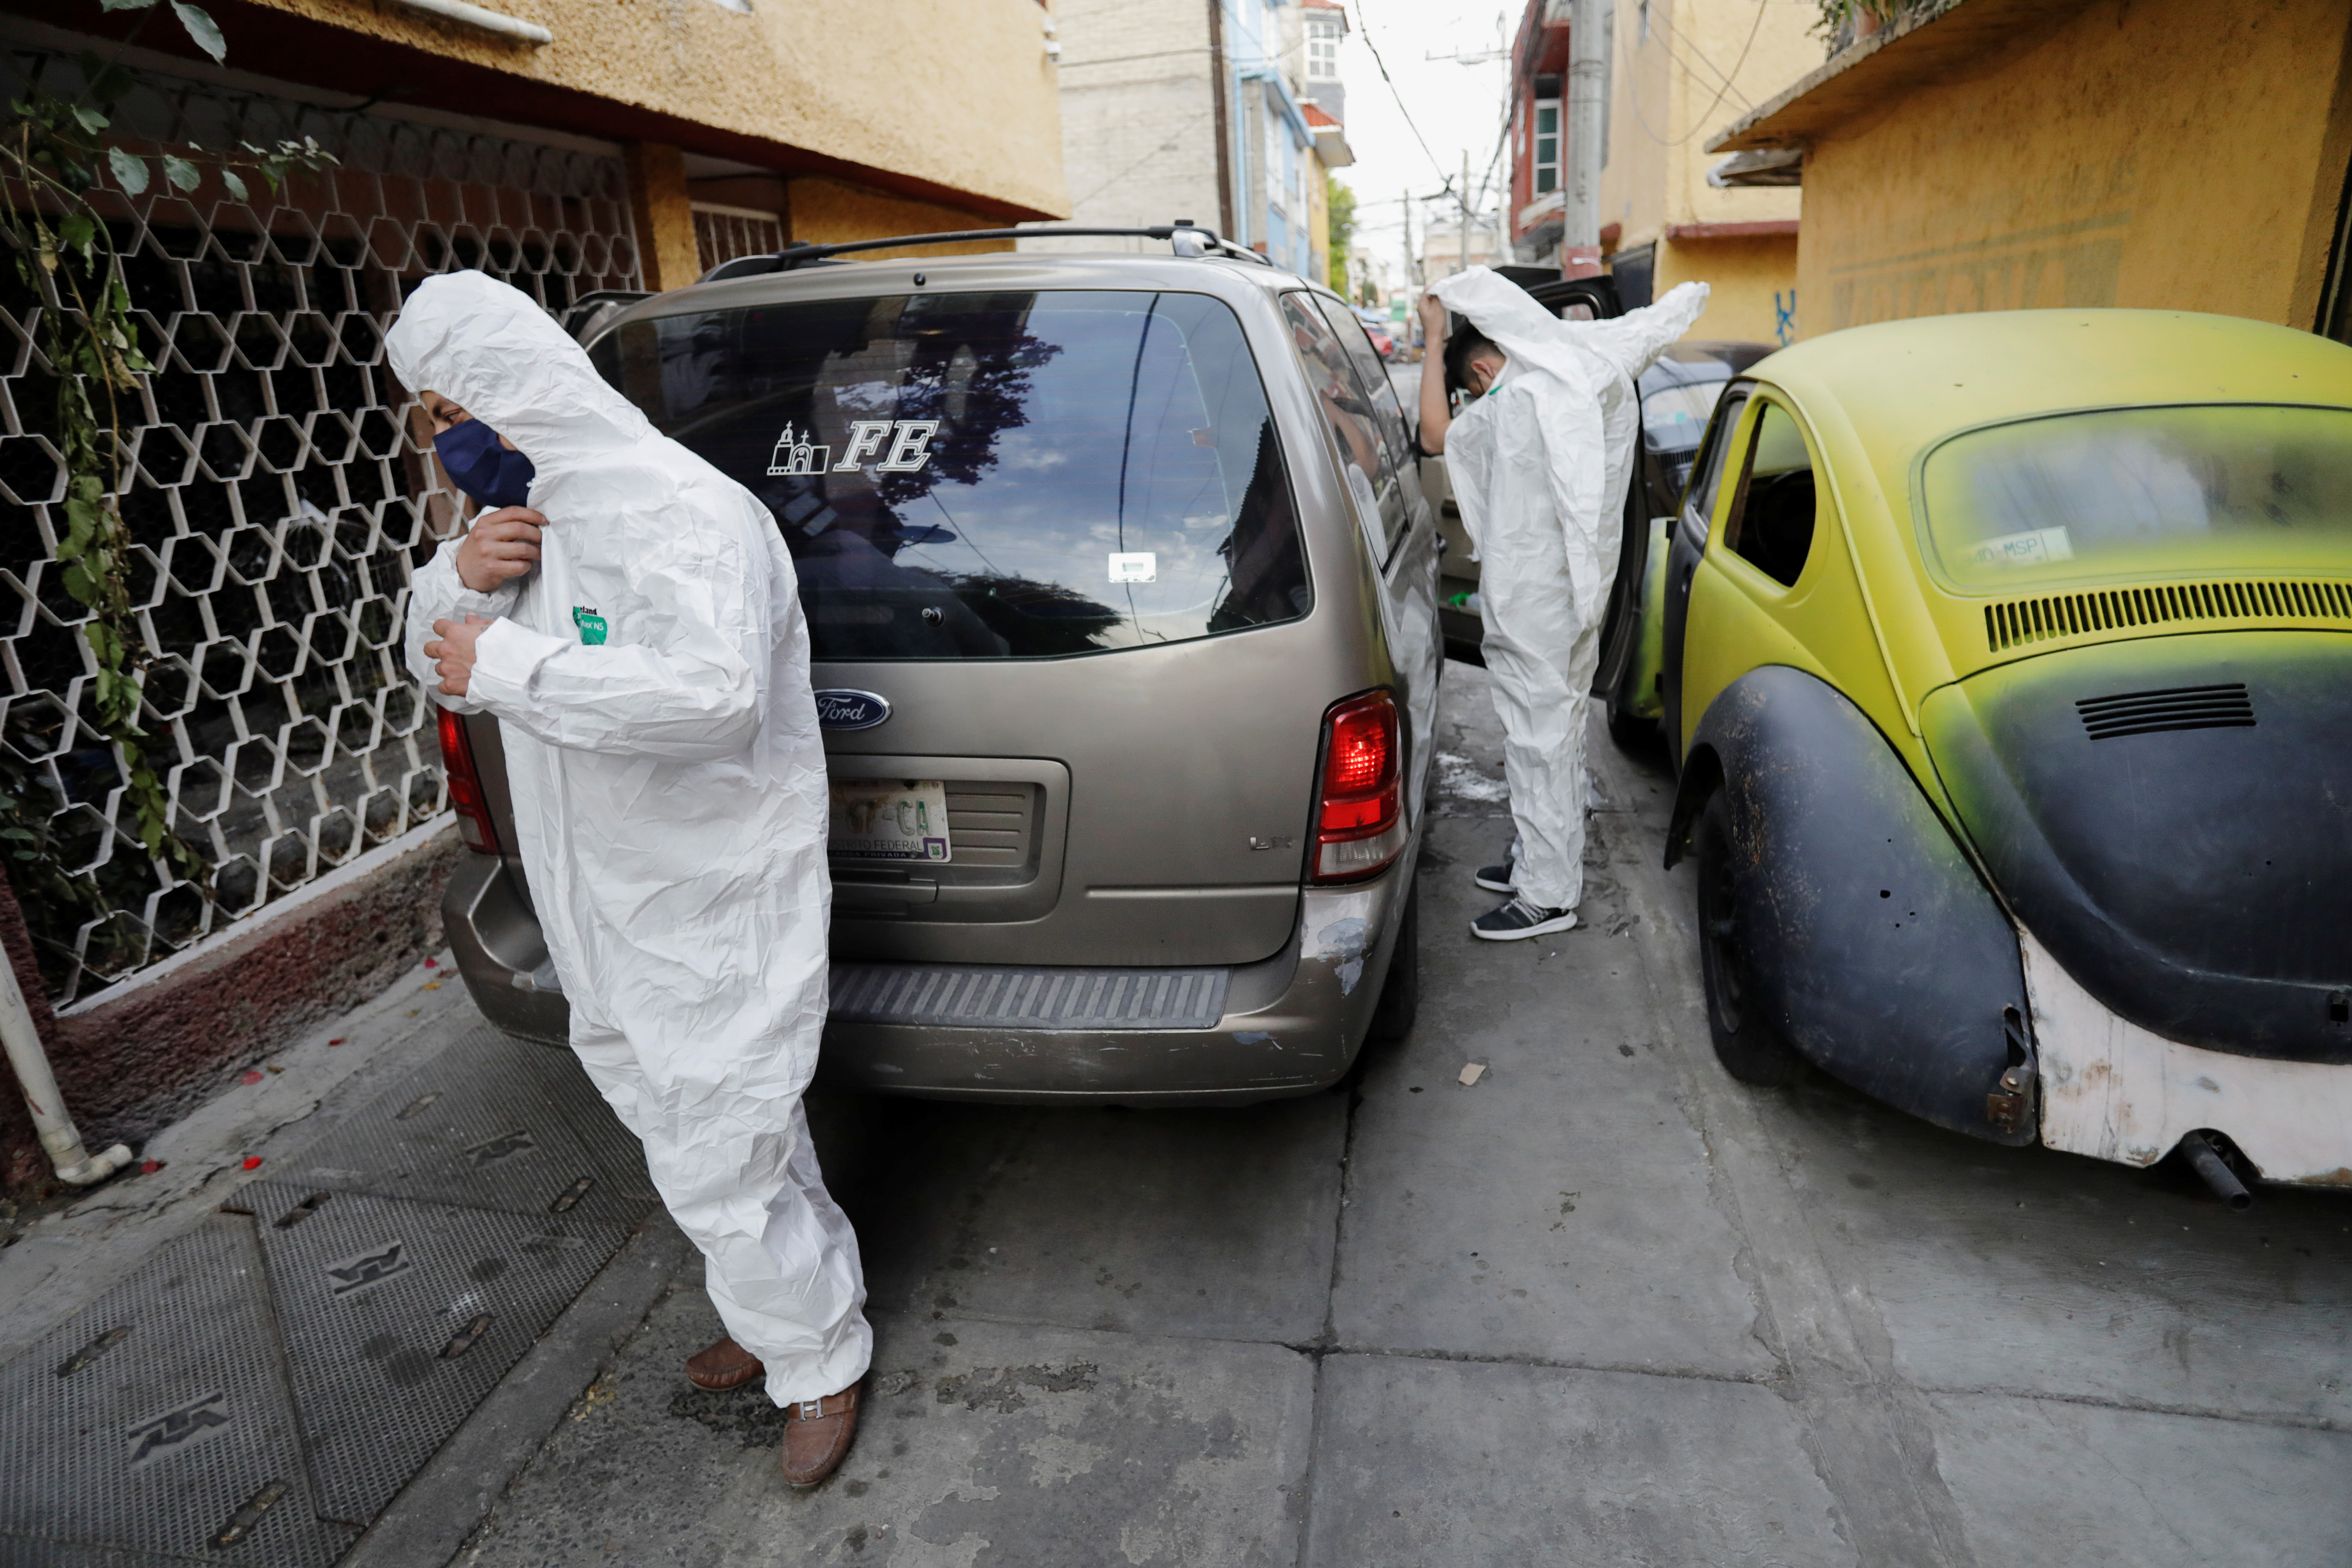 Employees of a funeral parlor get ready to remove the body of a person who died from the coronavirus disease (COVID-19) from a house, amid the COVID-19 outbreak, at the Iztapalapa neighbourhood in Mexico City, Mexico January 19, 2021. Picture taken January 19, 2021. REUTERS/Gustavo Graf